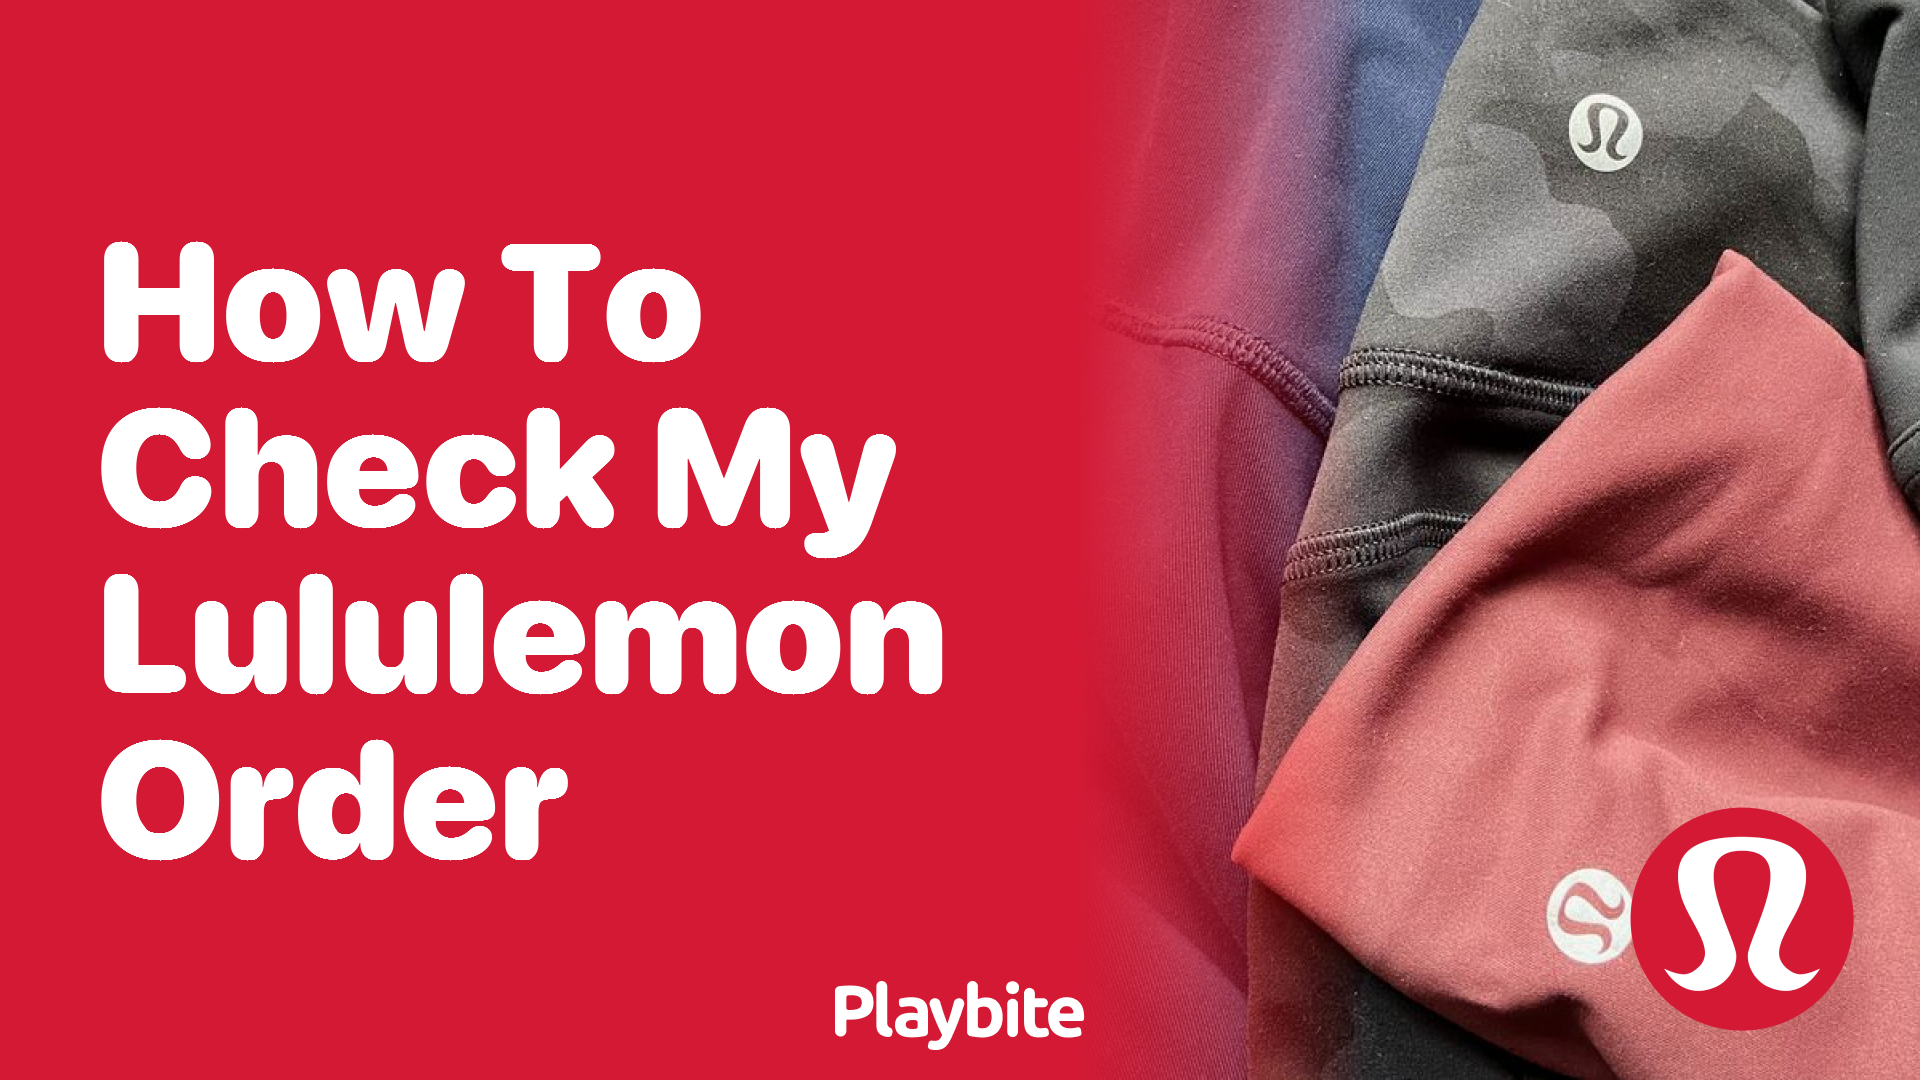 How to Check My Lululemon Order: A Quick Guide - Playbite